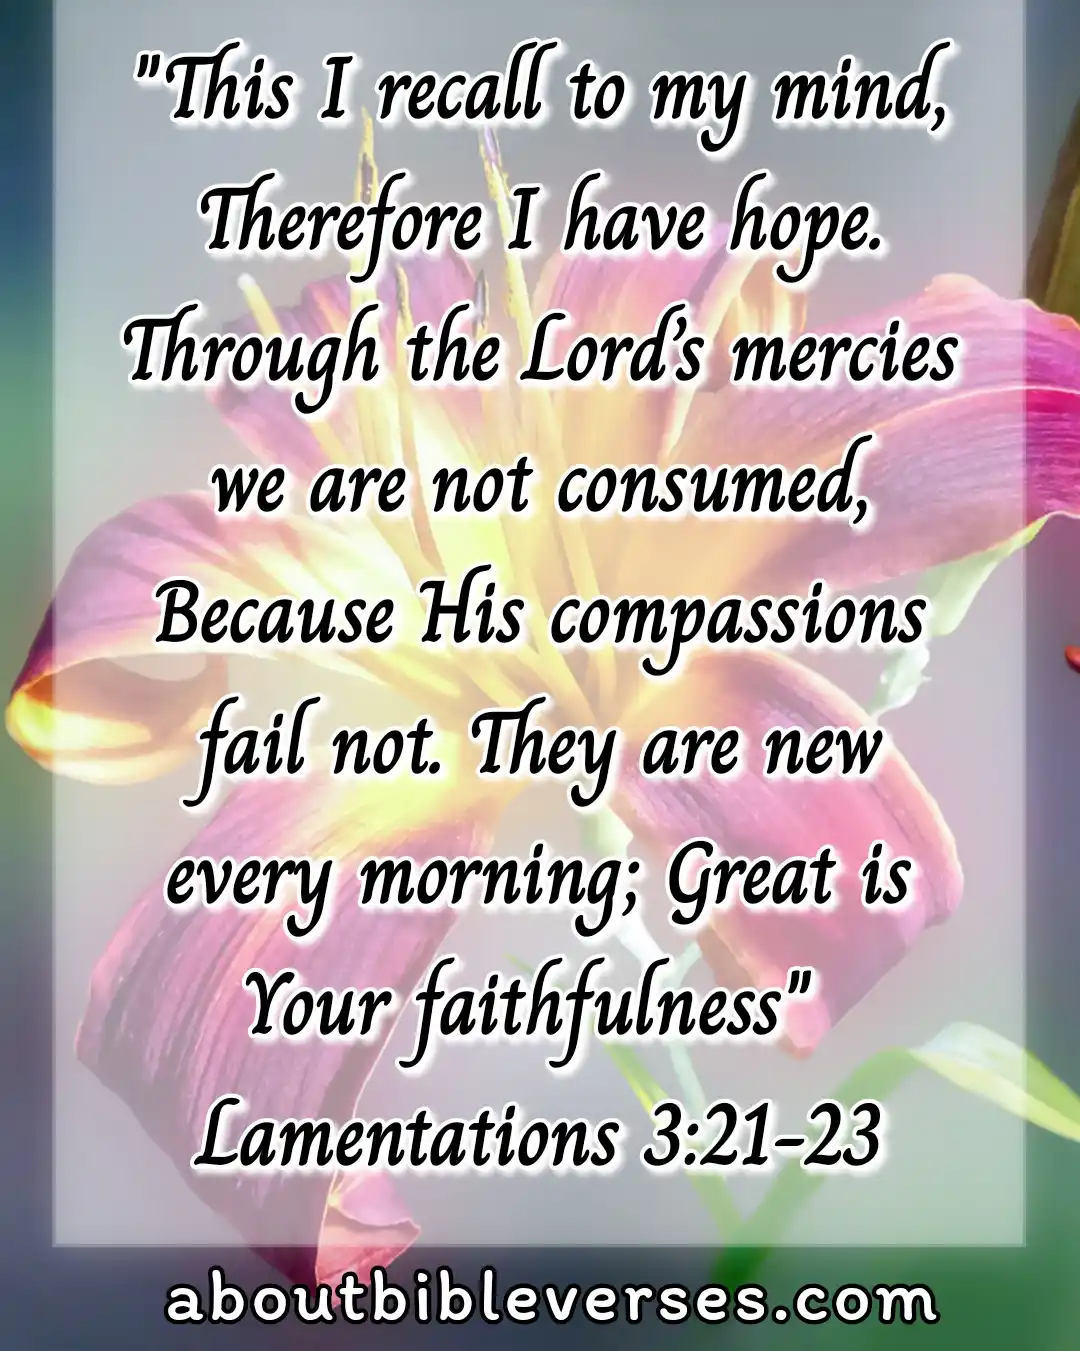 Bible verse about hope for the future (Lamentations 3:21-23)